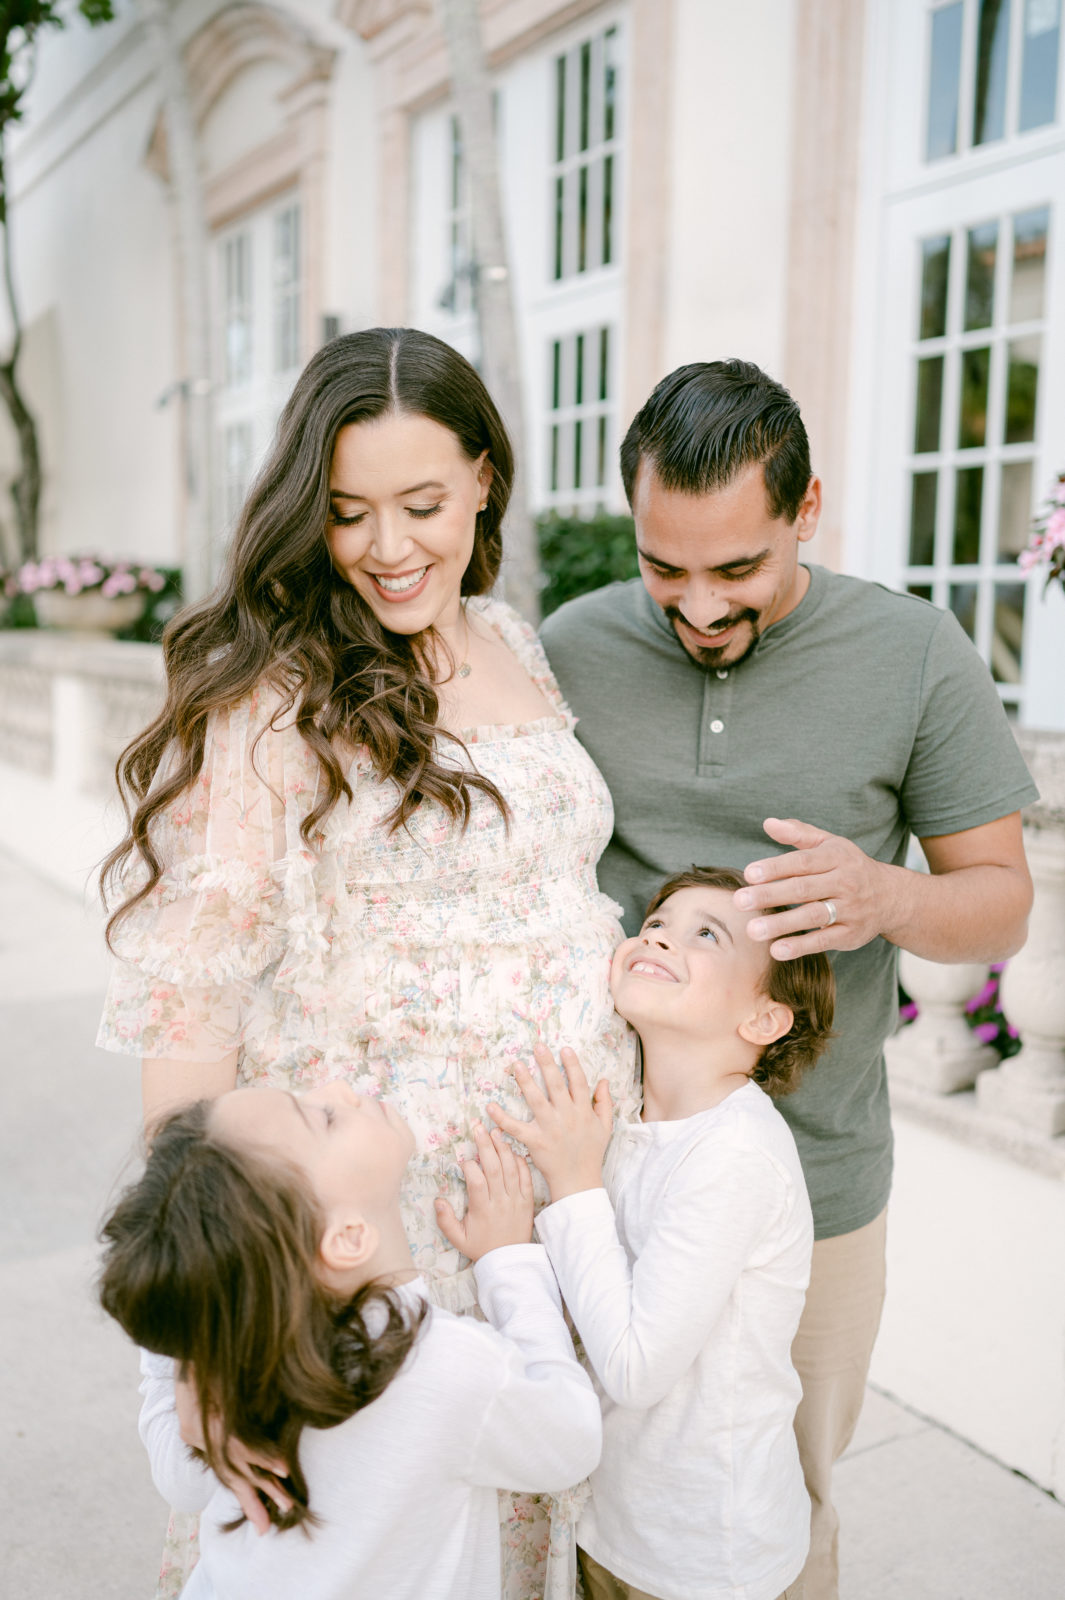 Tips for a successful Family session from a Miami Photographer